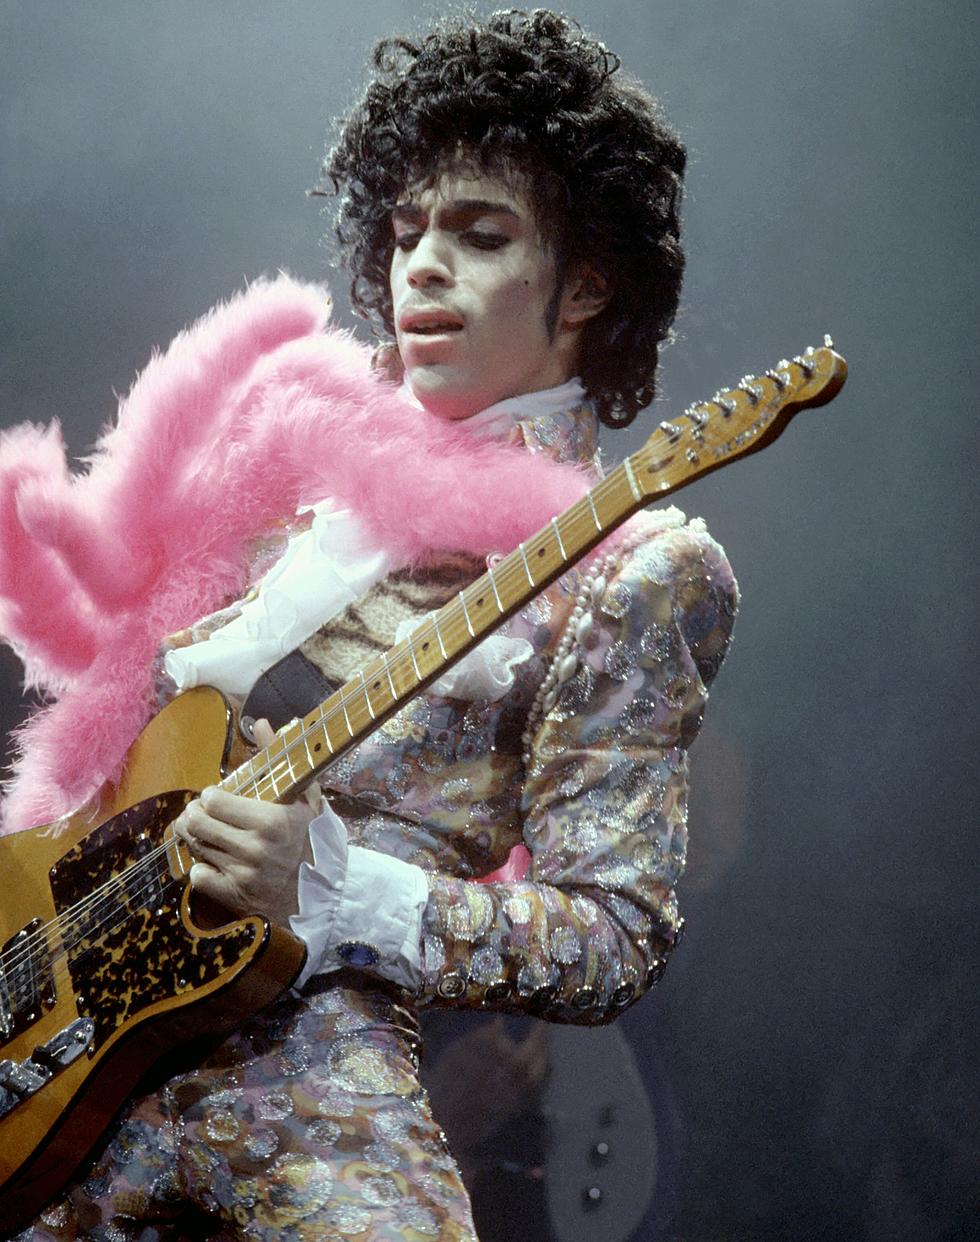 To Mark the Anniversary of Prince’s Death, Mega 99.3 Will Play His Music All Weekend Long